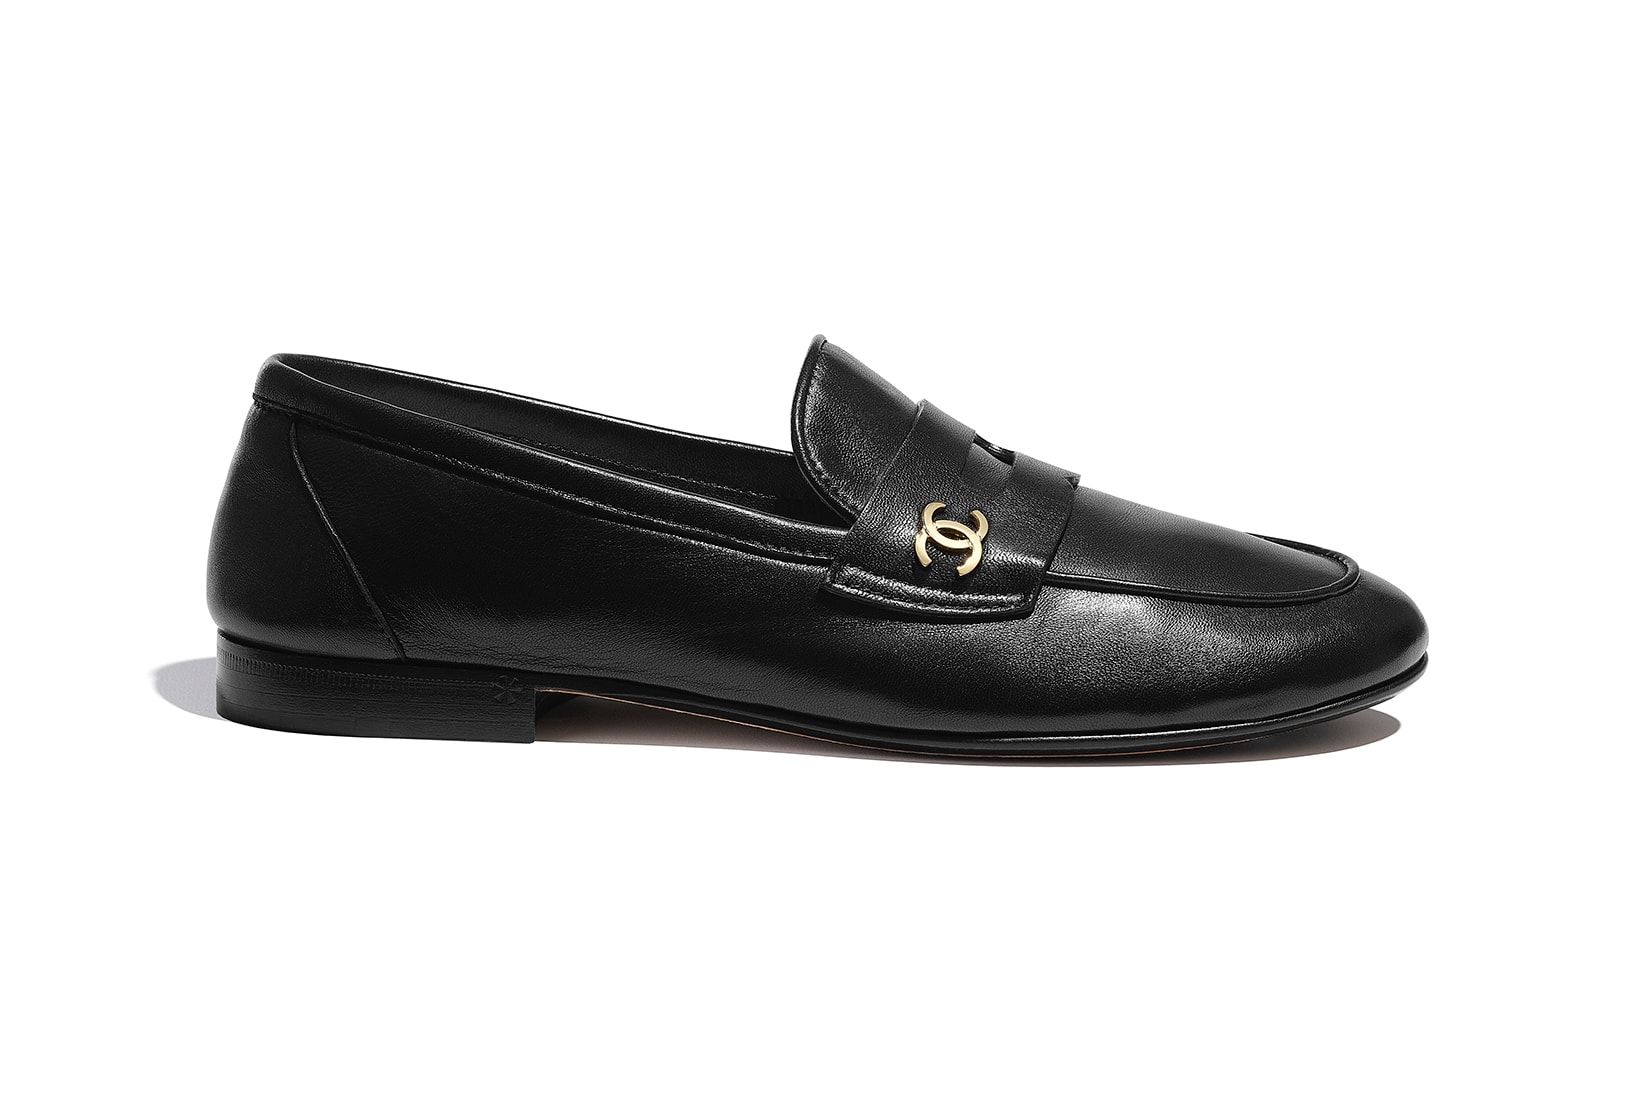 Chanel Loafers  Aesthetic shoes, Chanel loafers, Chanel shoes